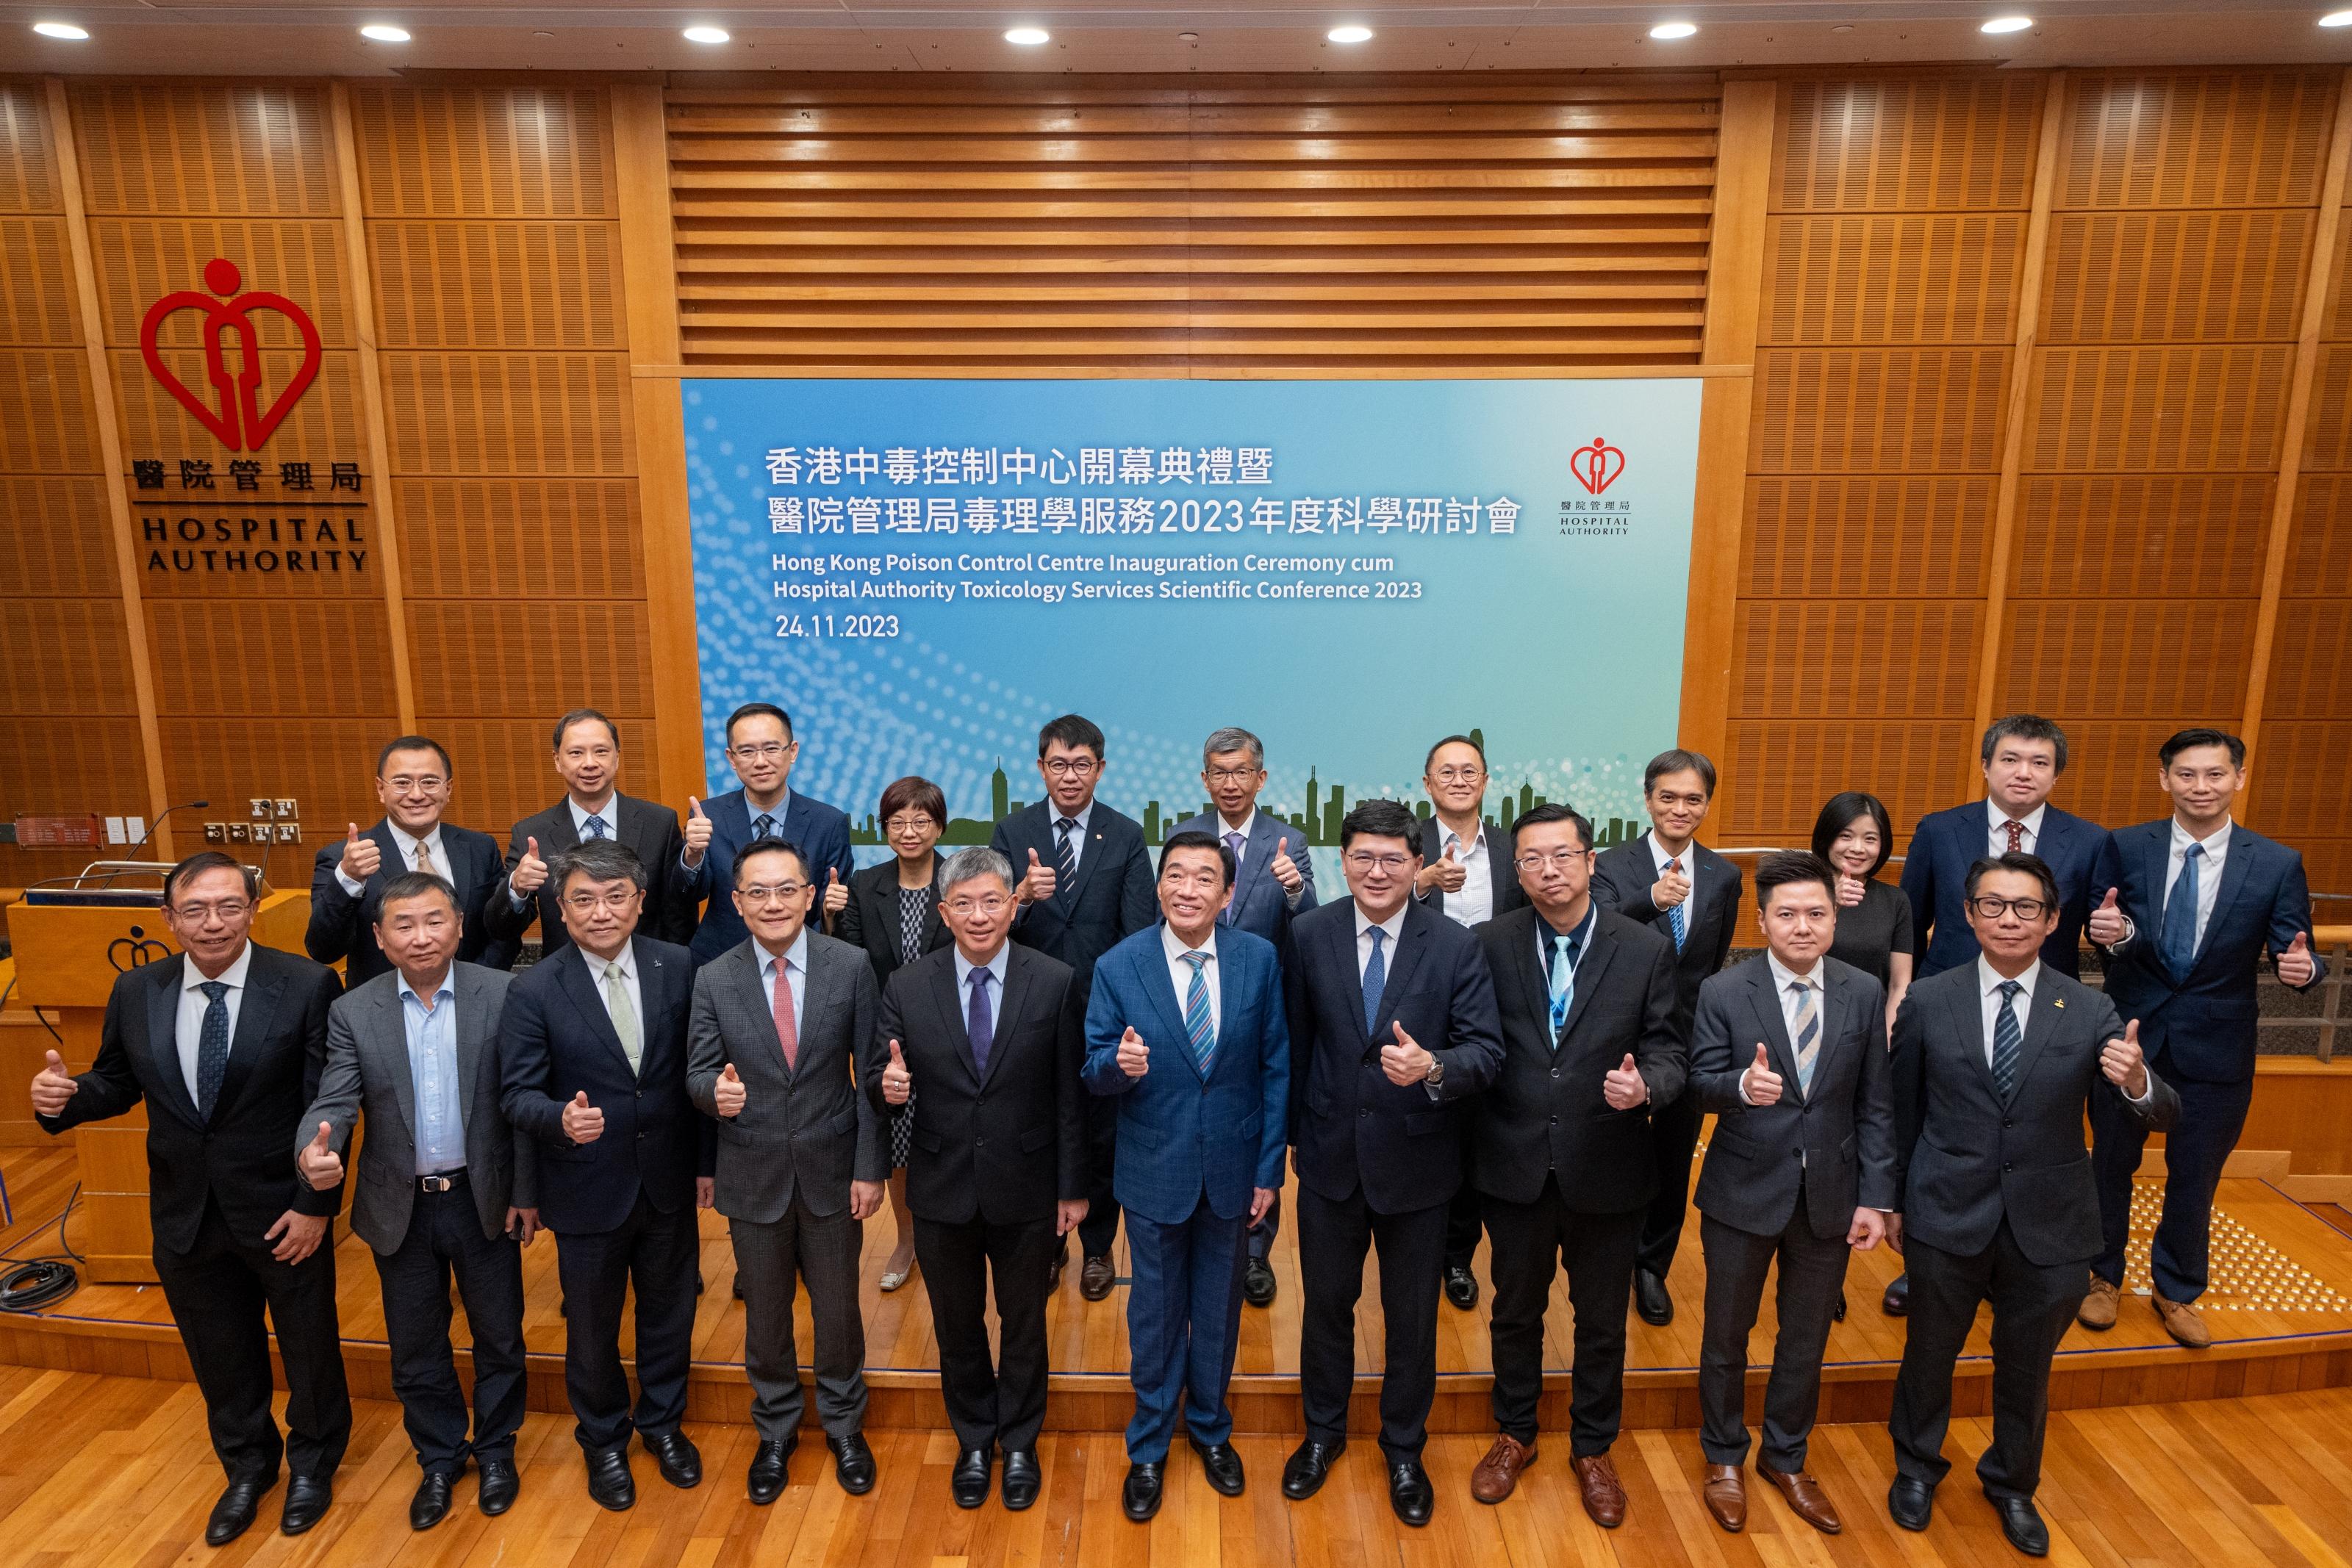 The Hospital Authority (HA) Hong Kong Poison Control Centre (HKPCC), which will co-ordinate poison control works in the public healthcare sector of Hong Kong, opens today (November 24). Photo shows the Chairman of the HA, Mr Henry Fan (front row, fifth right); the Permanent Secretary for Health, Mr Thomas Chan (front row, fifth left); the Chief Executive of the HA, Dr Tony Ko (front row, fourth right); the Director of Health, Dr Ronald Lam (front row, fourth left) and several toxicology experts attending the inauguration ceremony of the HKPCC.